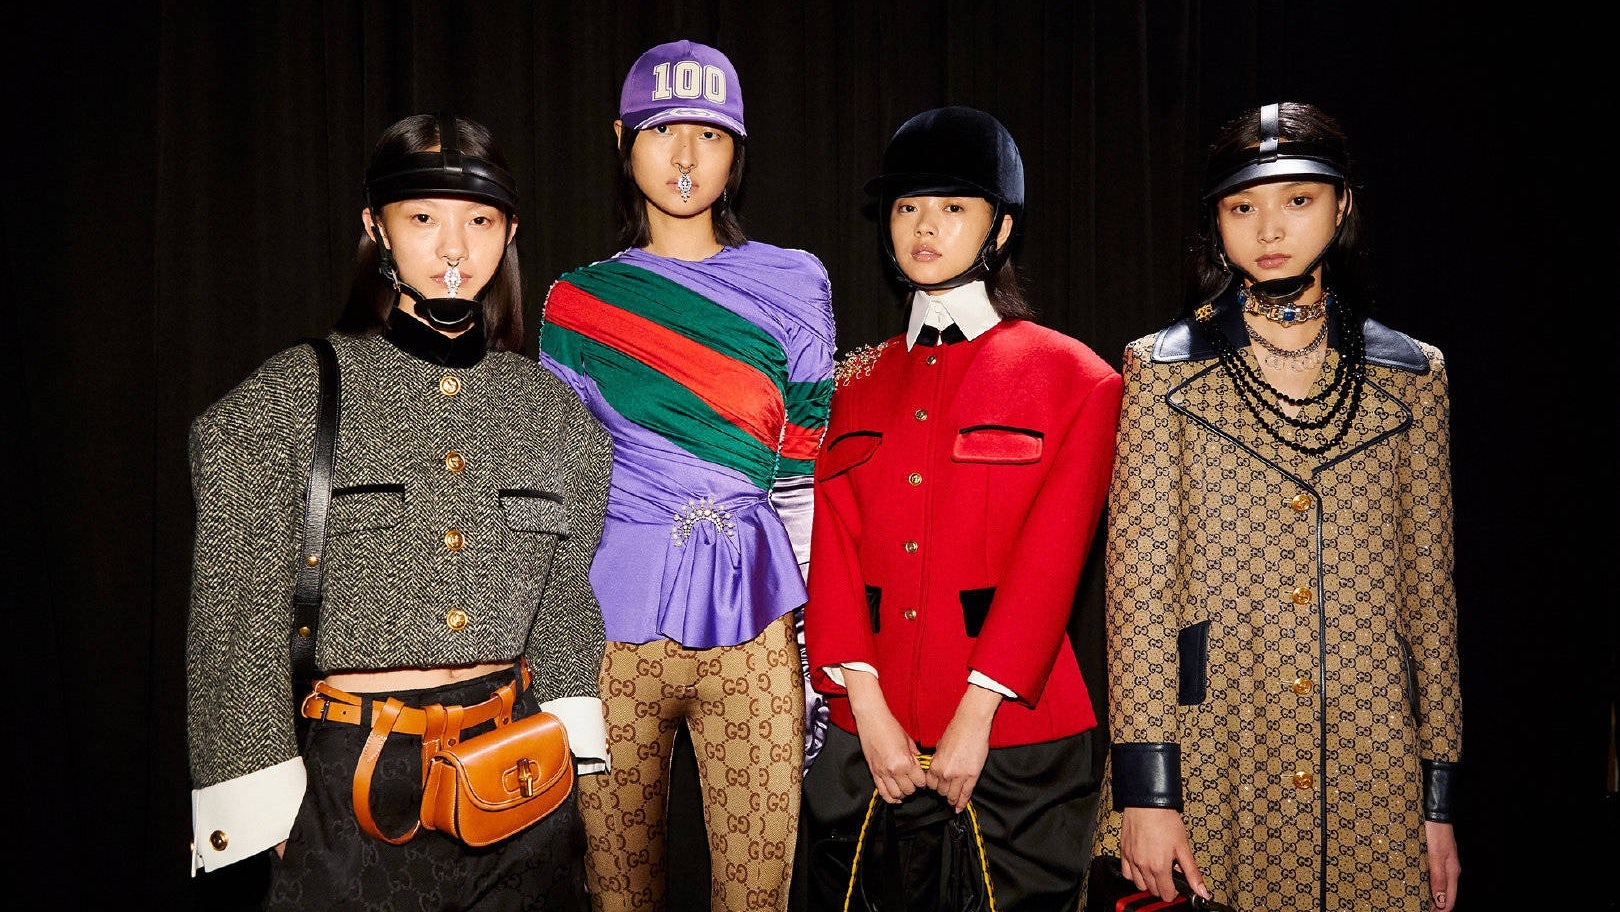 According to the new Bain report, luxury has bounced back to pre-pandemic levels ahead of forecasts. But what is luxury’s next big opportunity? Photo: Gucci Aria